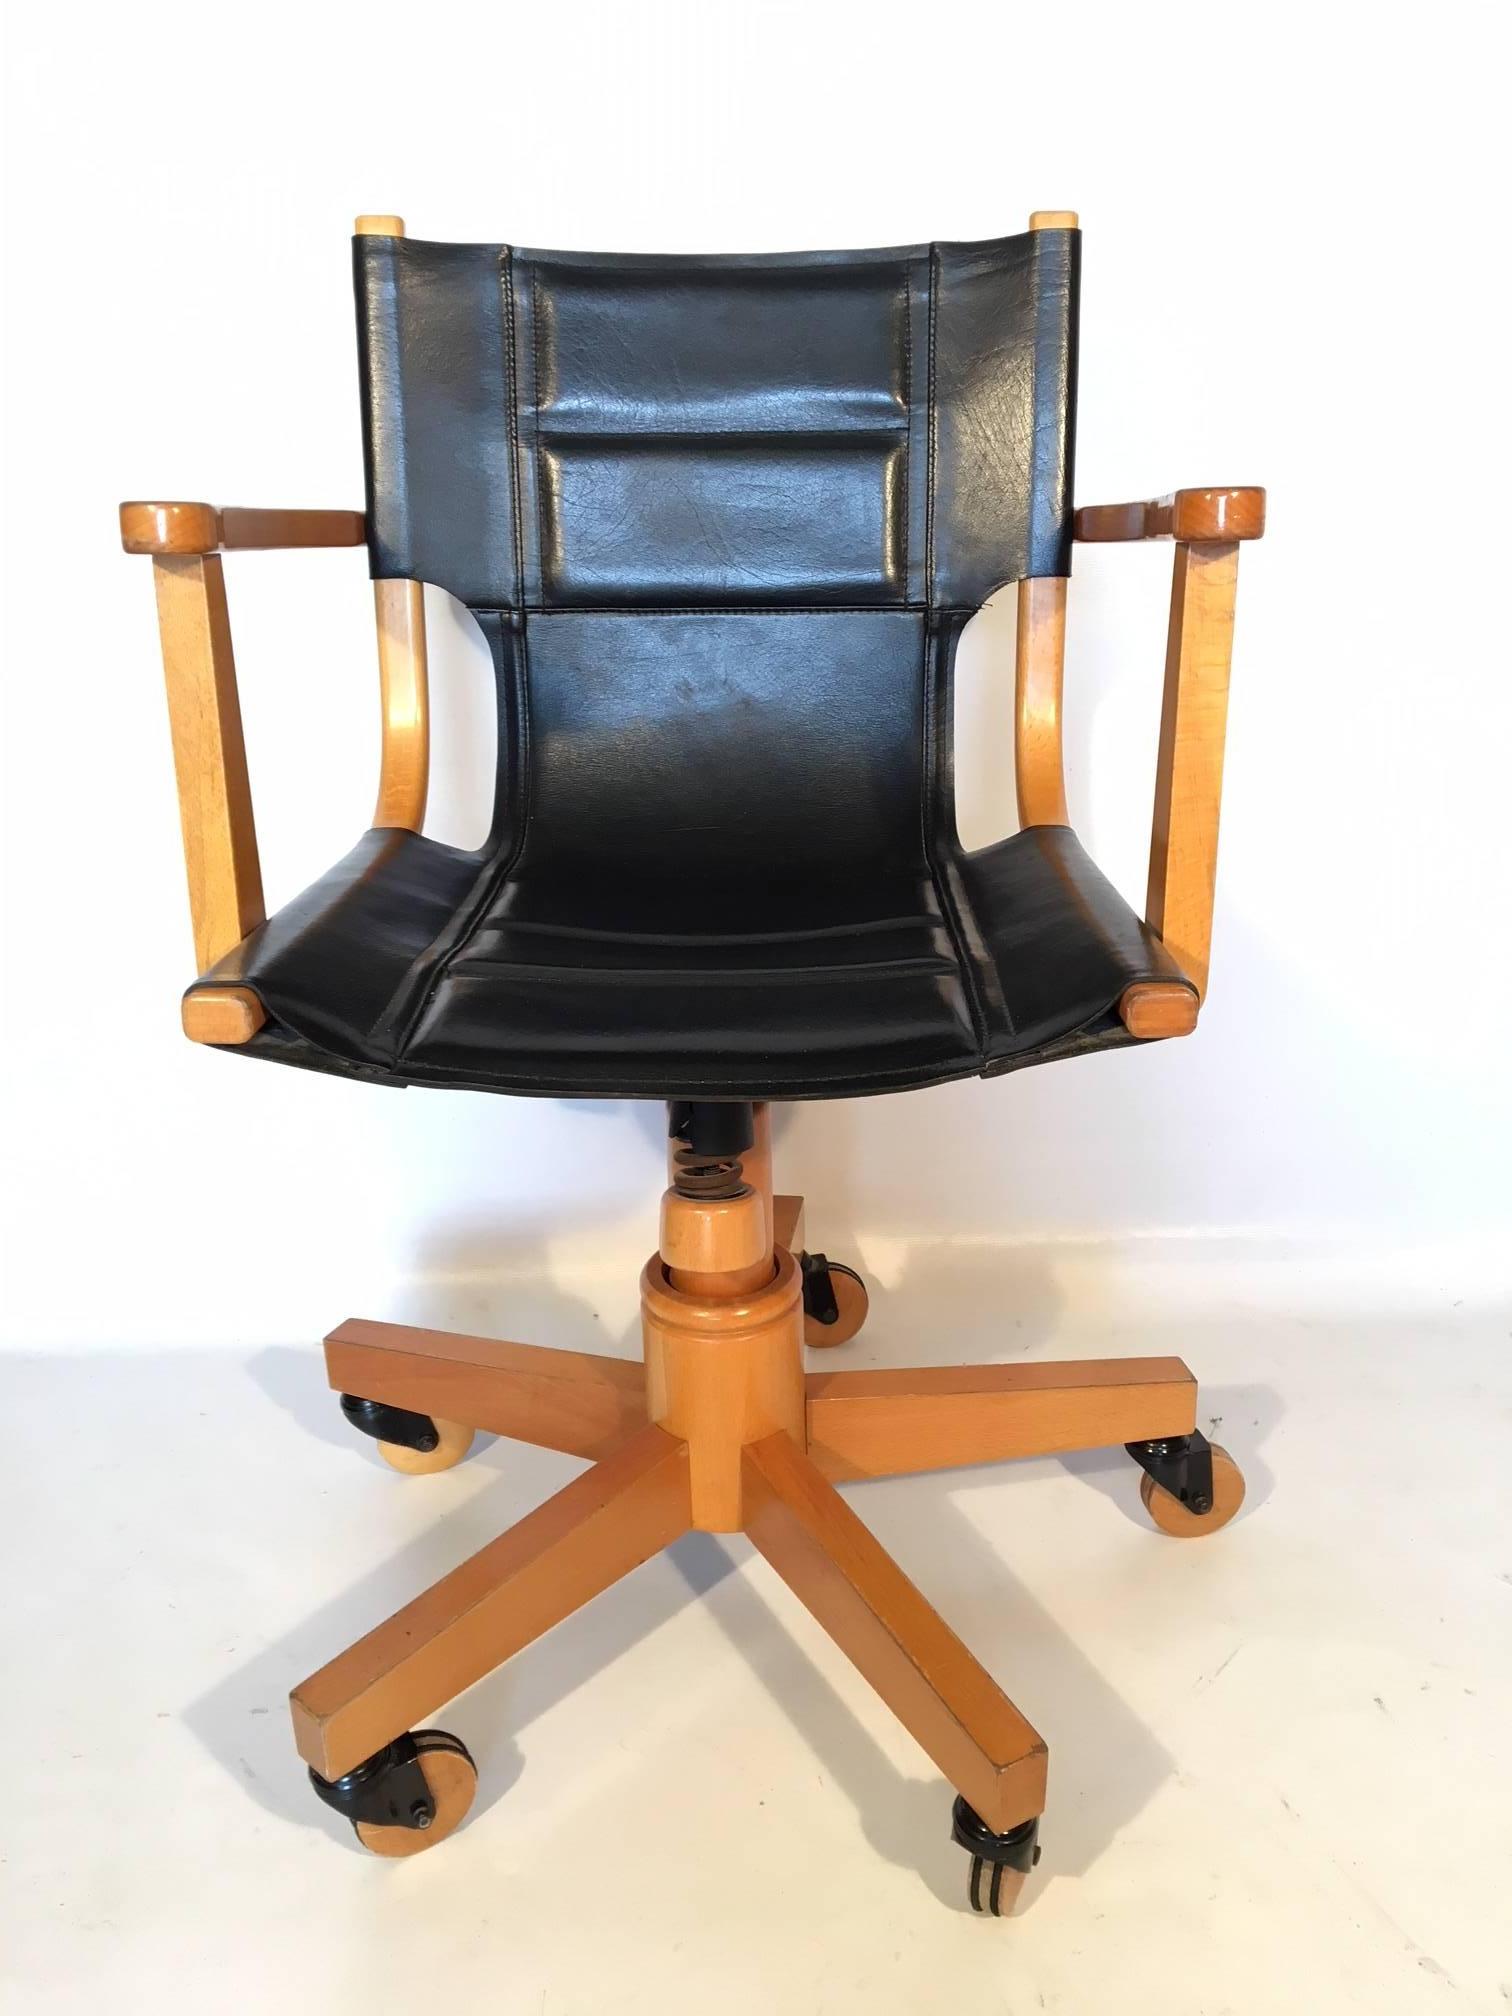 Midcentury swivel office chair by Asher Benjamin Studio features black leather and light hardwood frame. Adjustable hydraulic lifting and rocking seat. Good vintage condition with minor age appropriate wear. Measures: 23